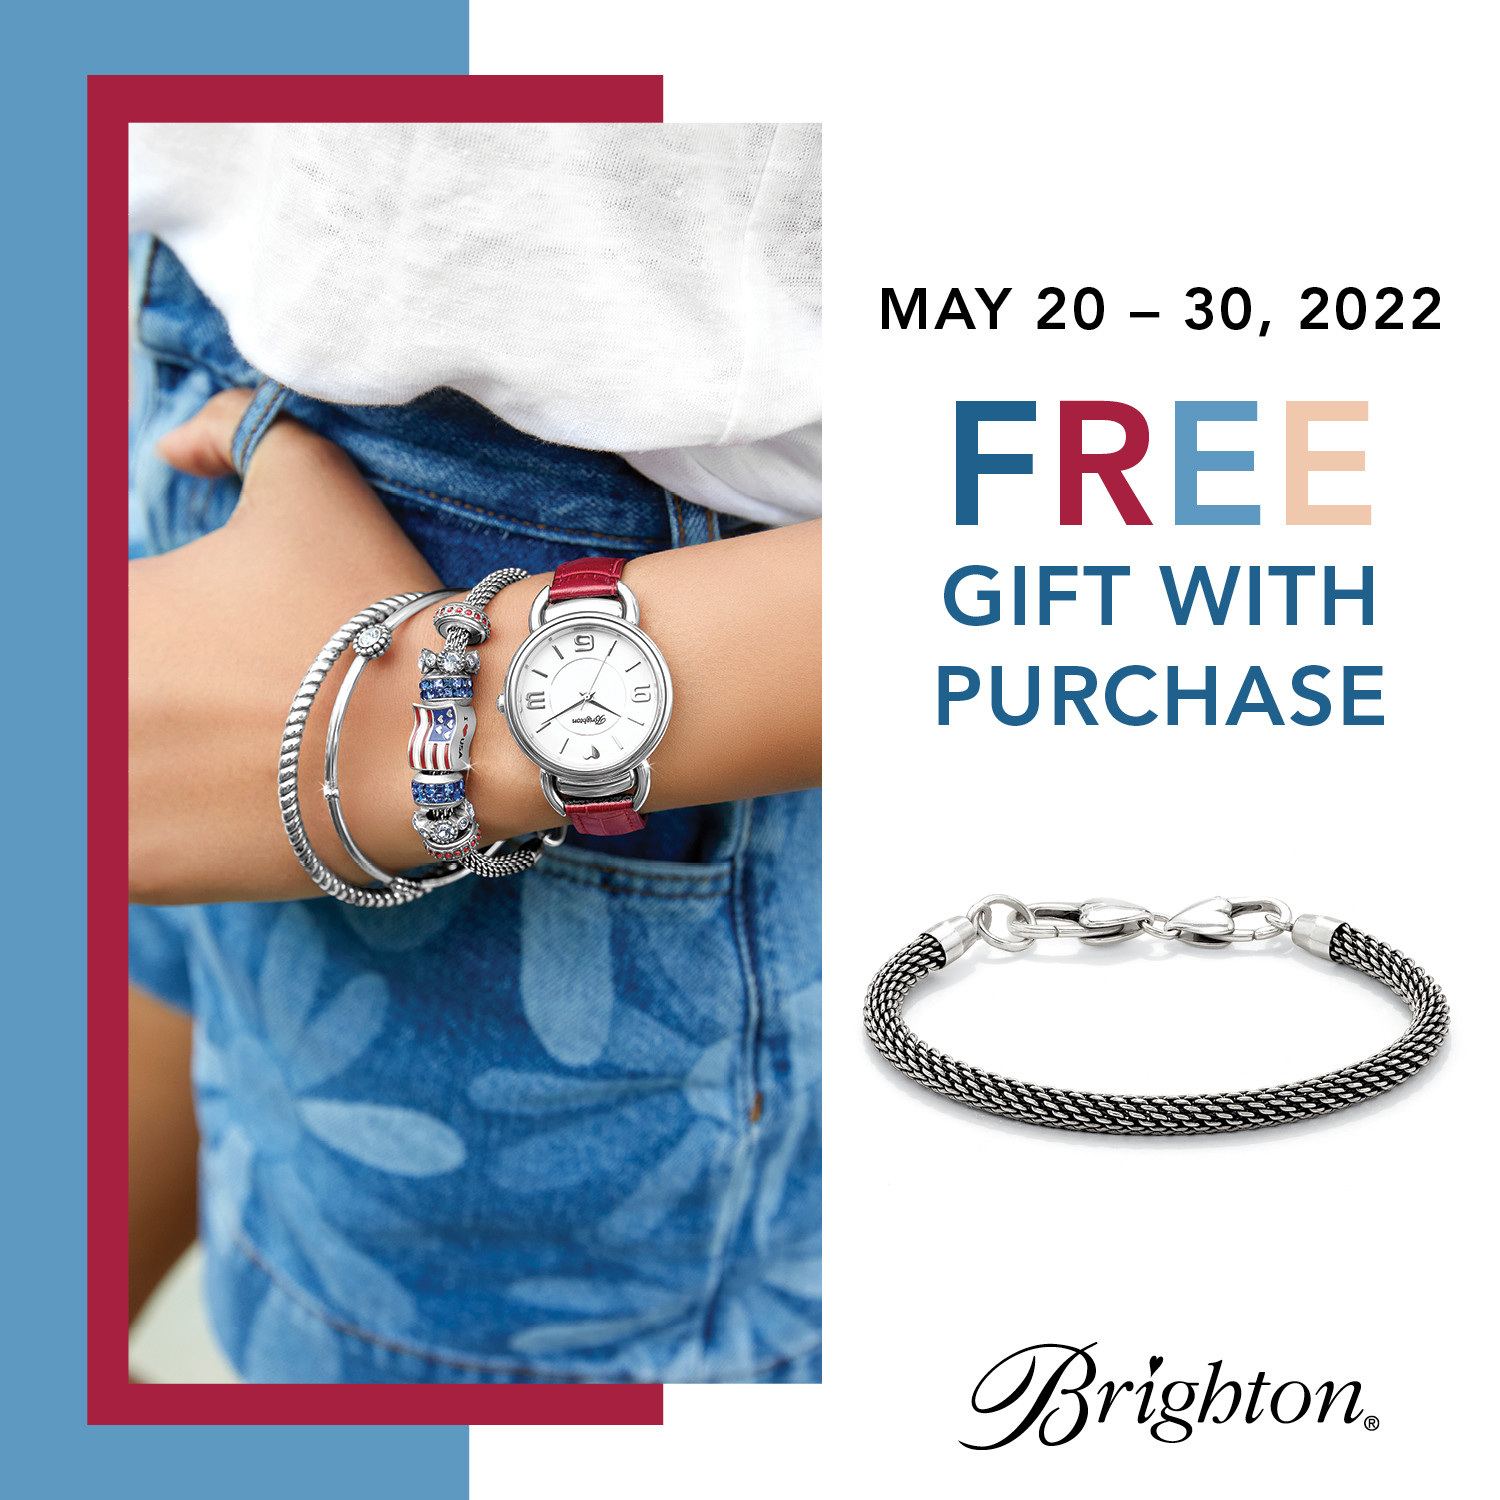 Free Gift with Purchase from Brighton Collectibles